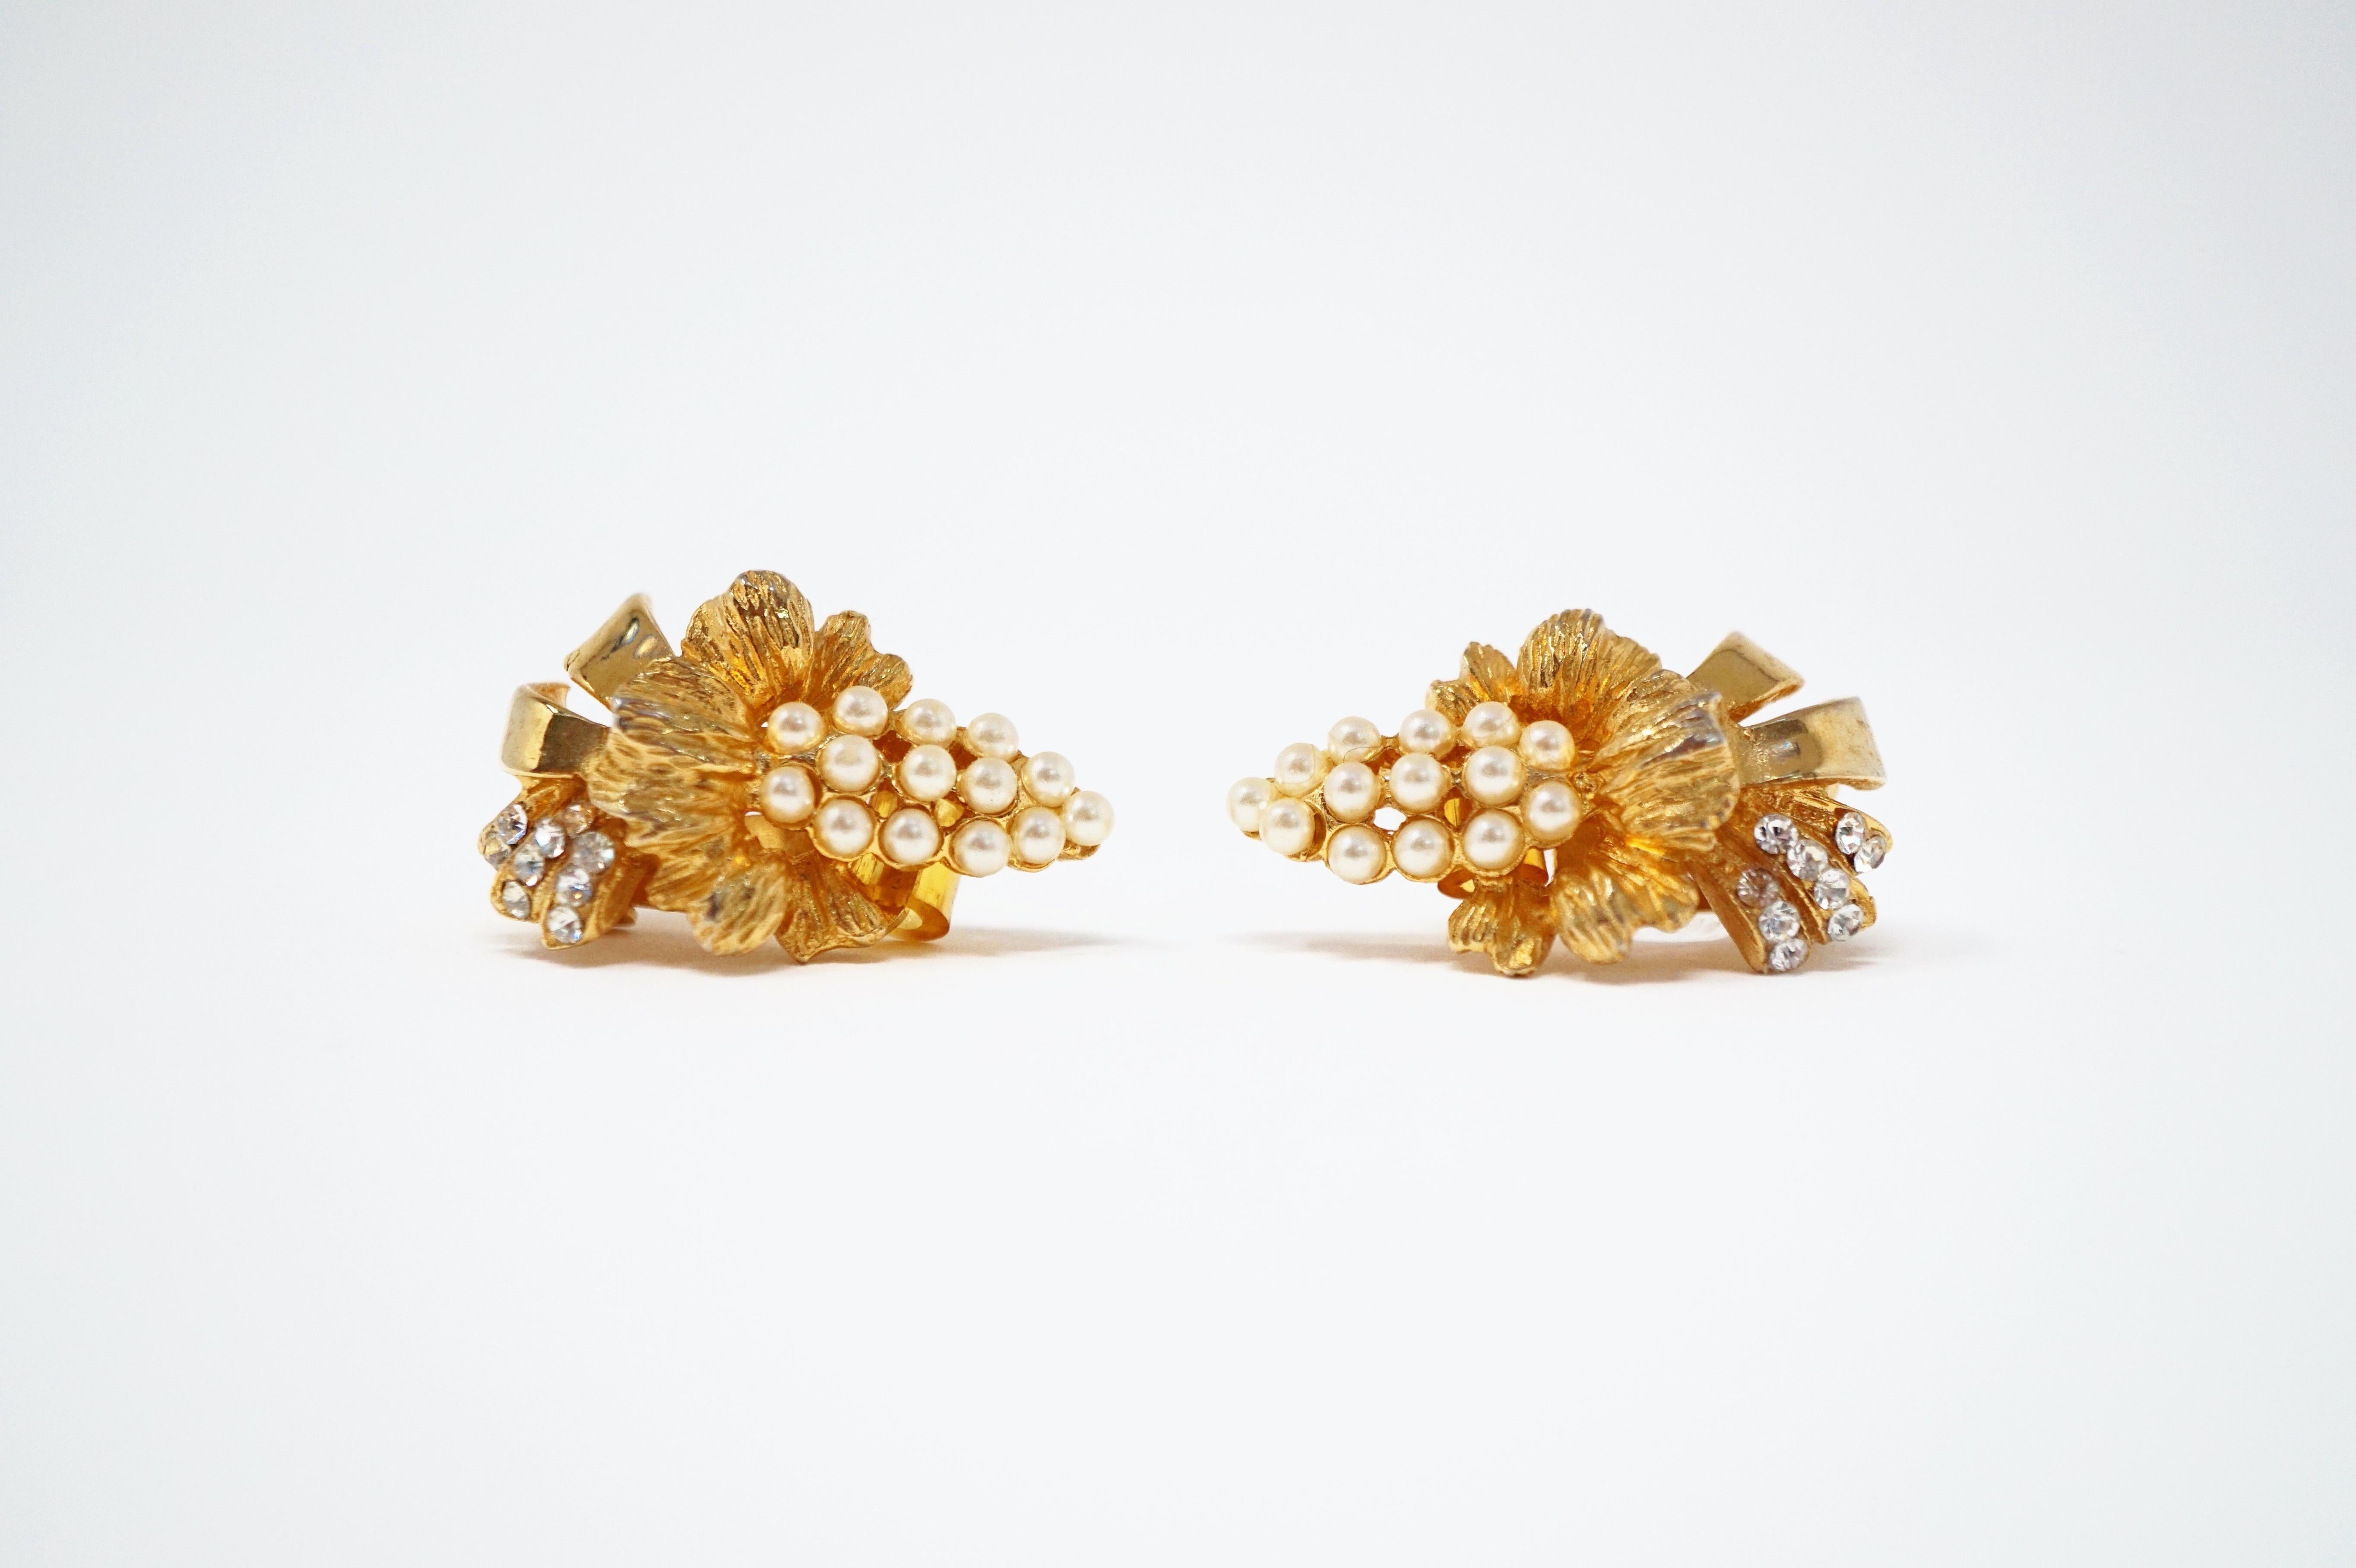 Hobé Vintage Gilded Pearl & Crystal Rhinestone Statement Earrings, Signed, 1950s For Sale 2